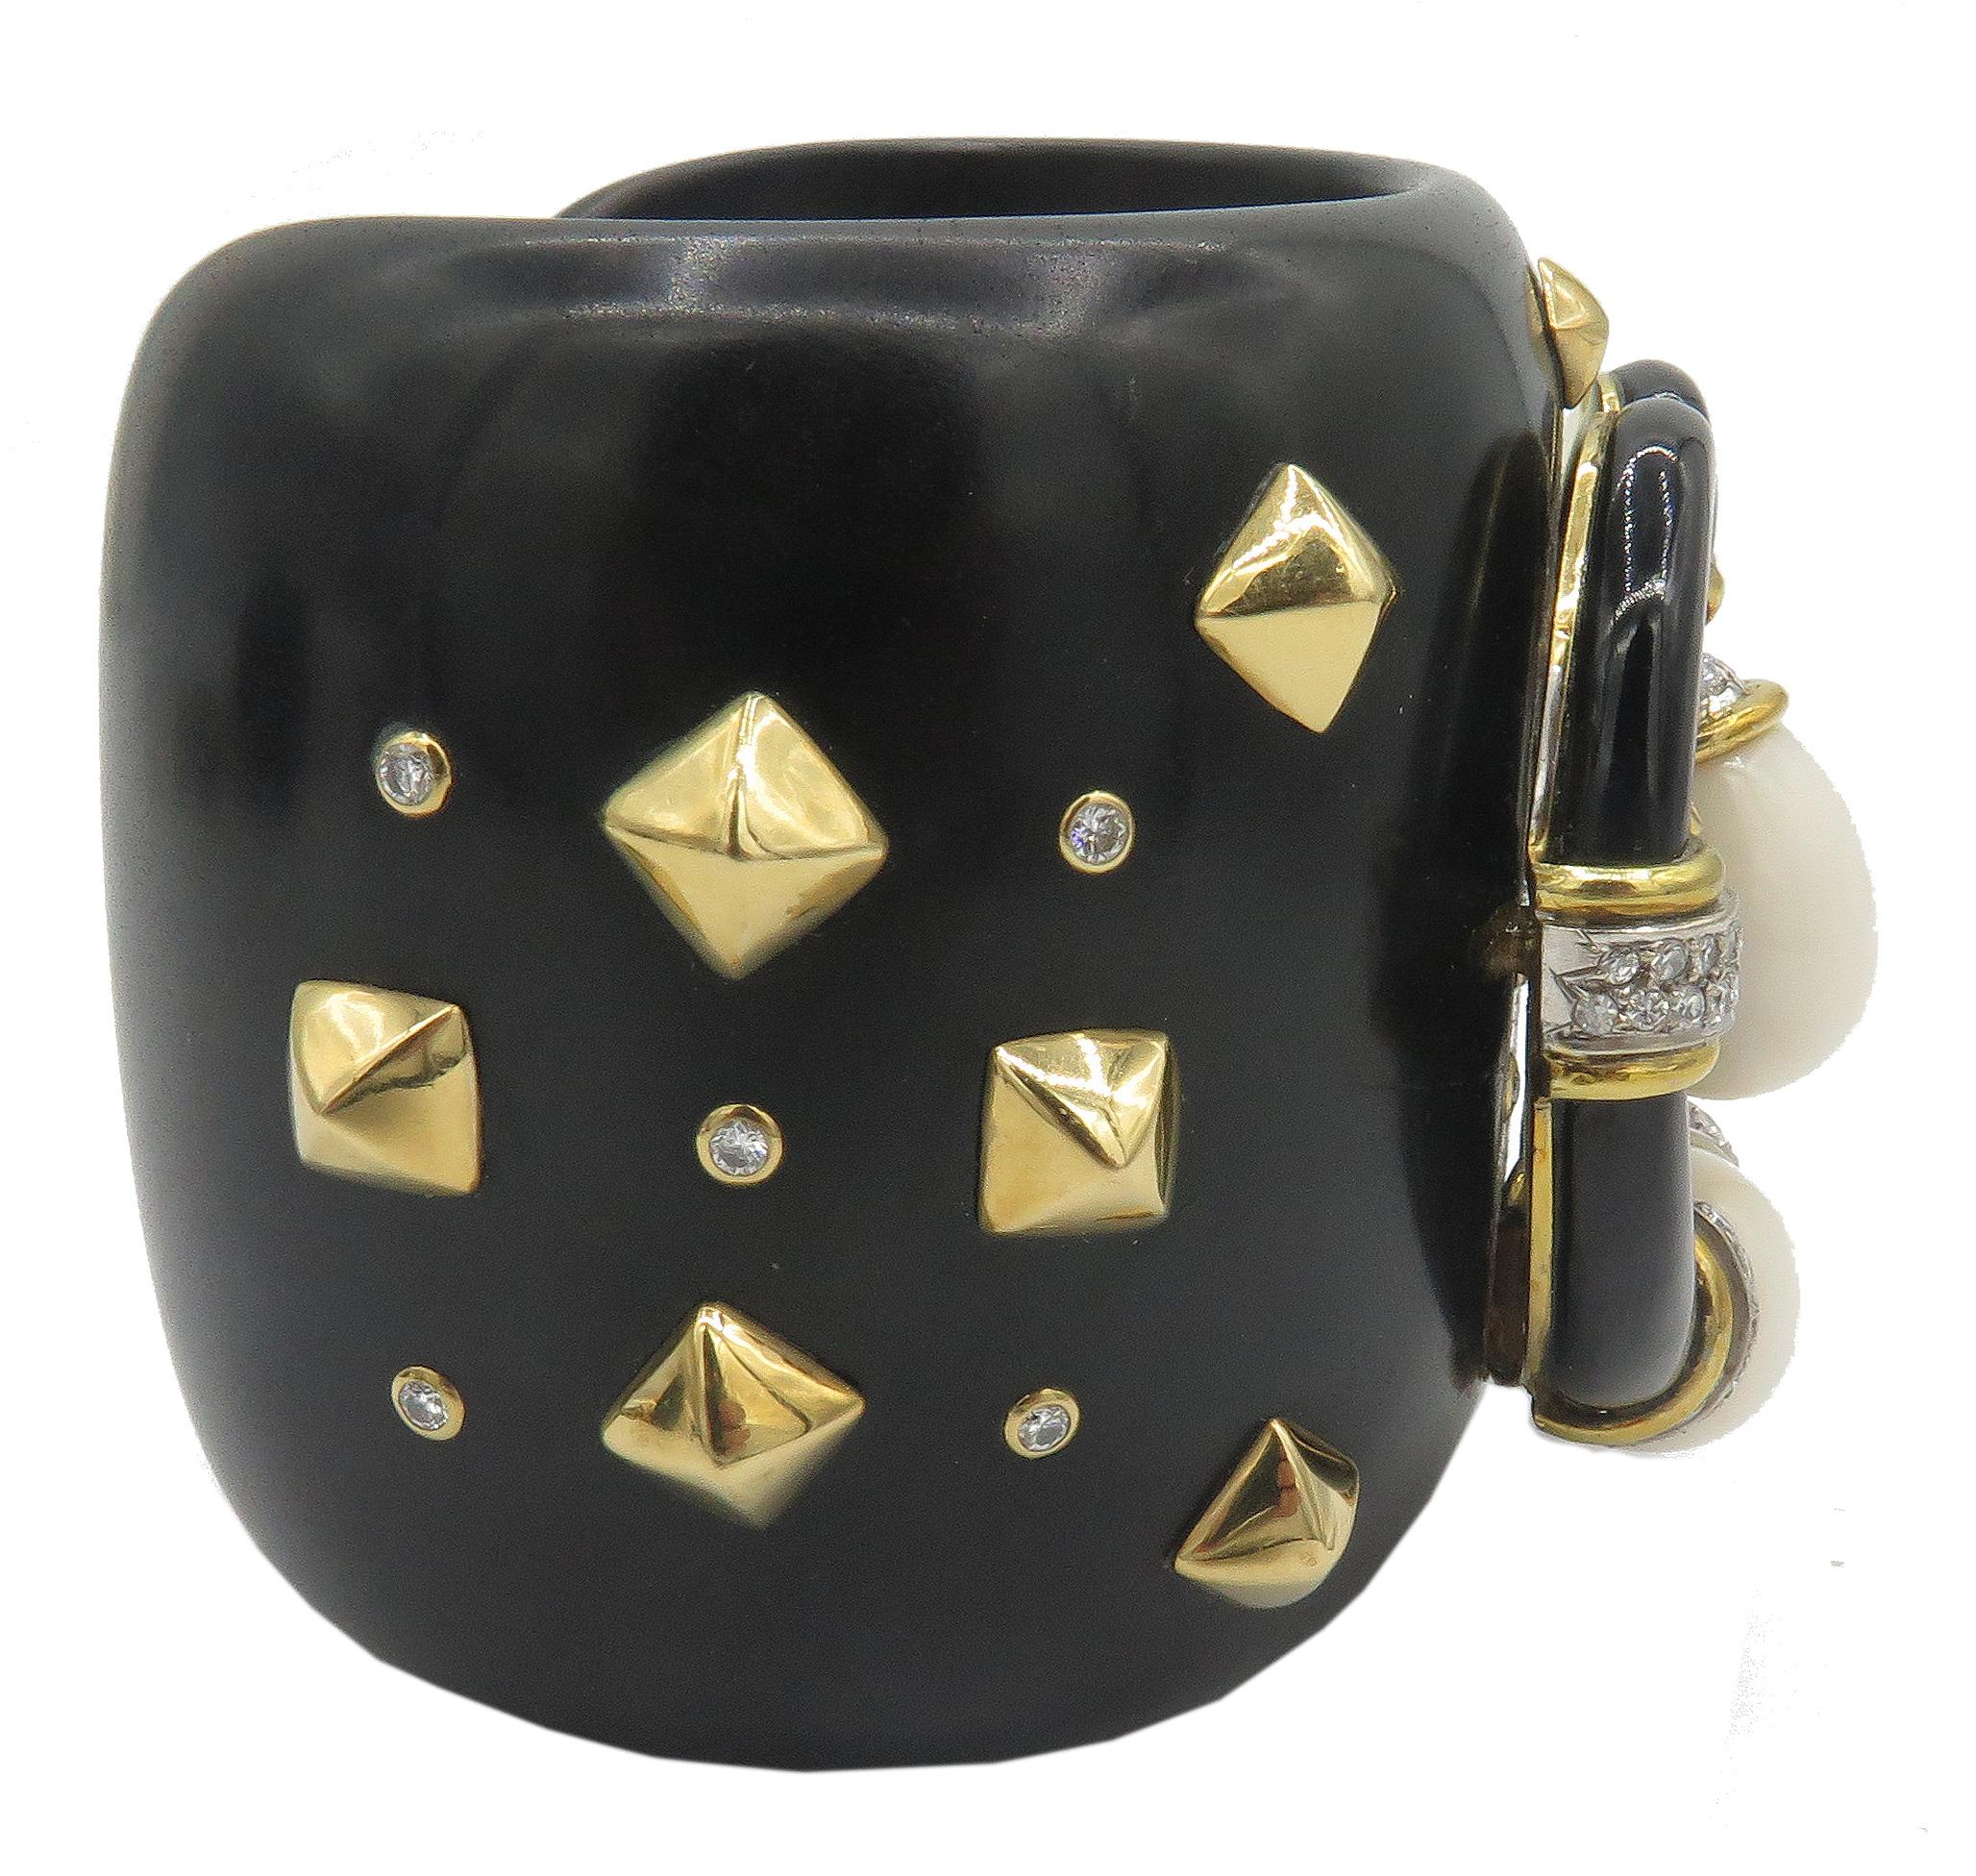 A, beautiful and unique Ebony handmade cuff bracelet with a beautiful design. With a wrist opening of approximately 24mm, and a weight of 140grams. This, Ebony cuff bracelet includes 2 Agate stones. This cuff bracelet has an array of 18K yellow gold